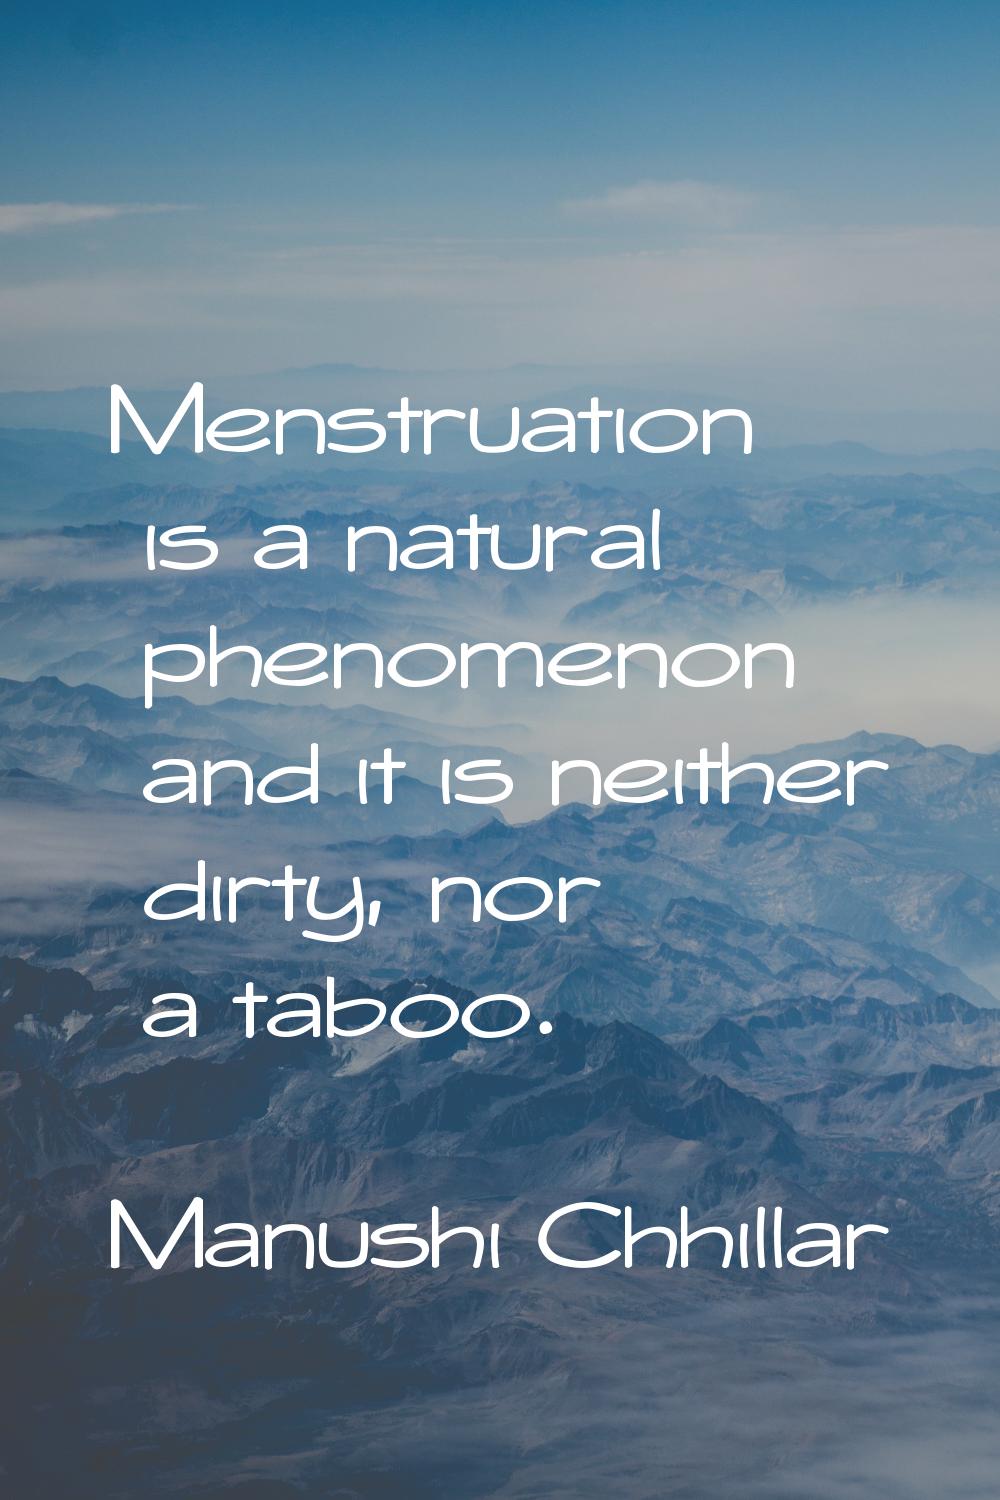 Menstruation is a natural phenomenon and it is neither dirty, nor a taboo.